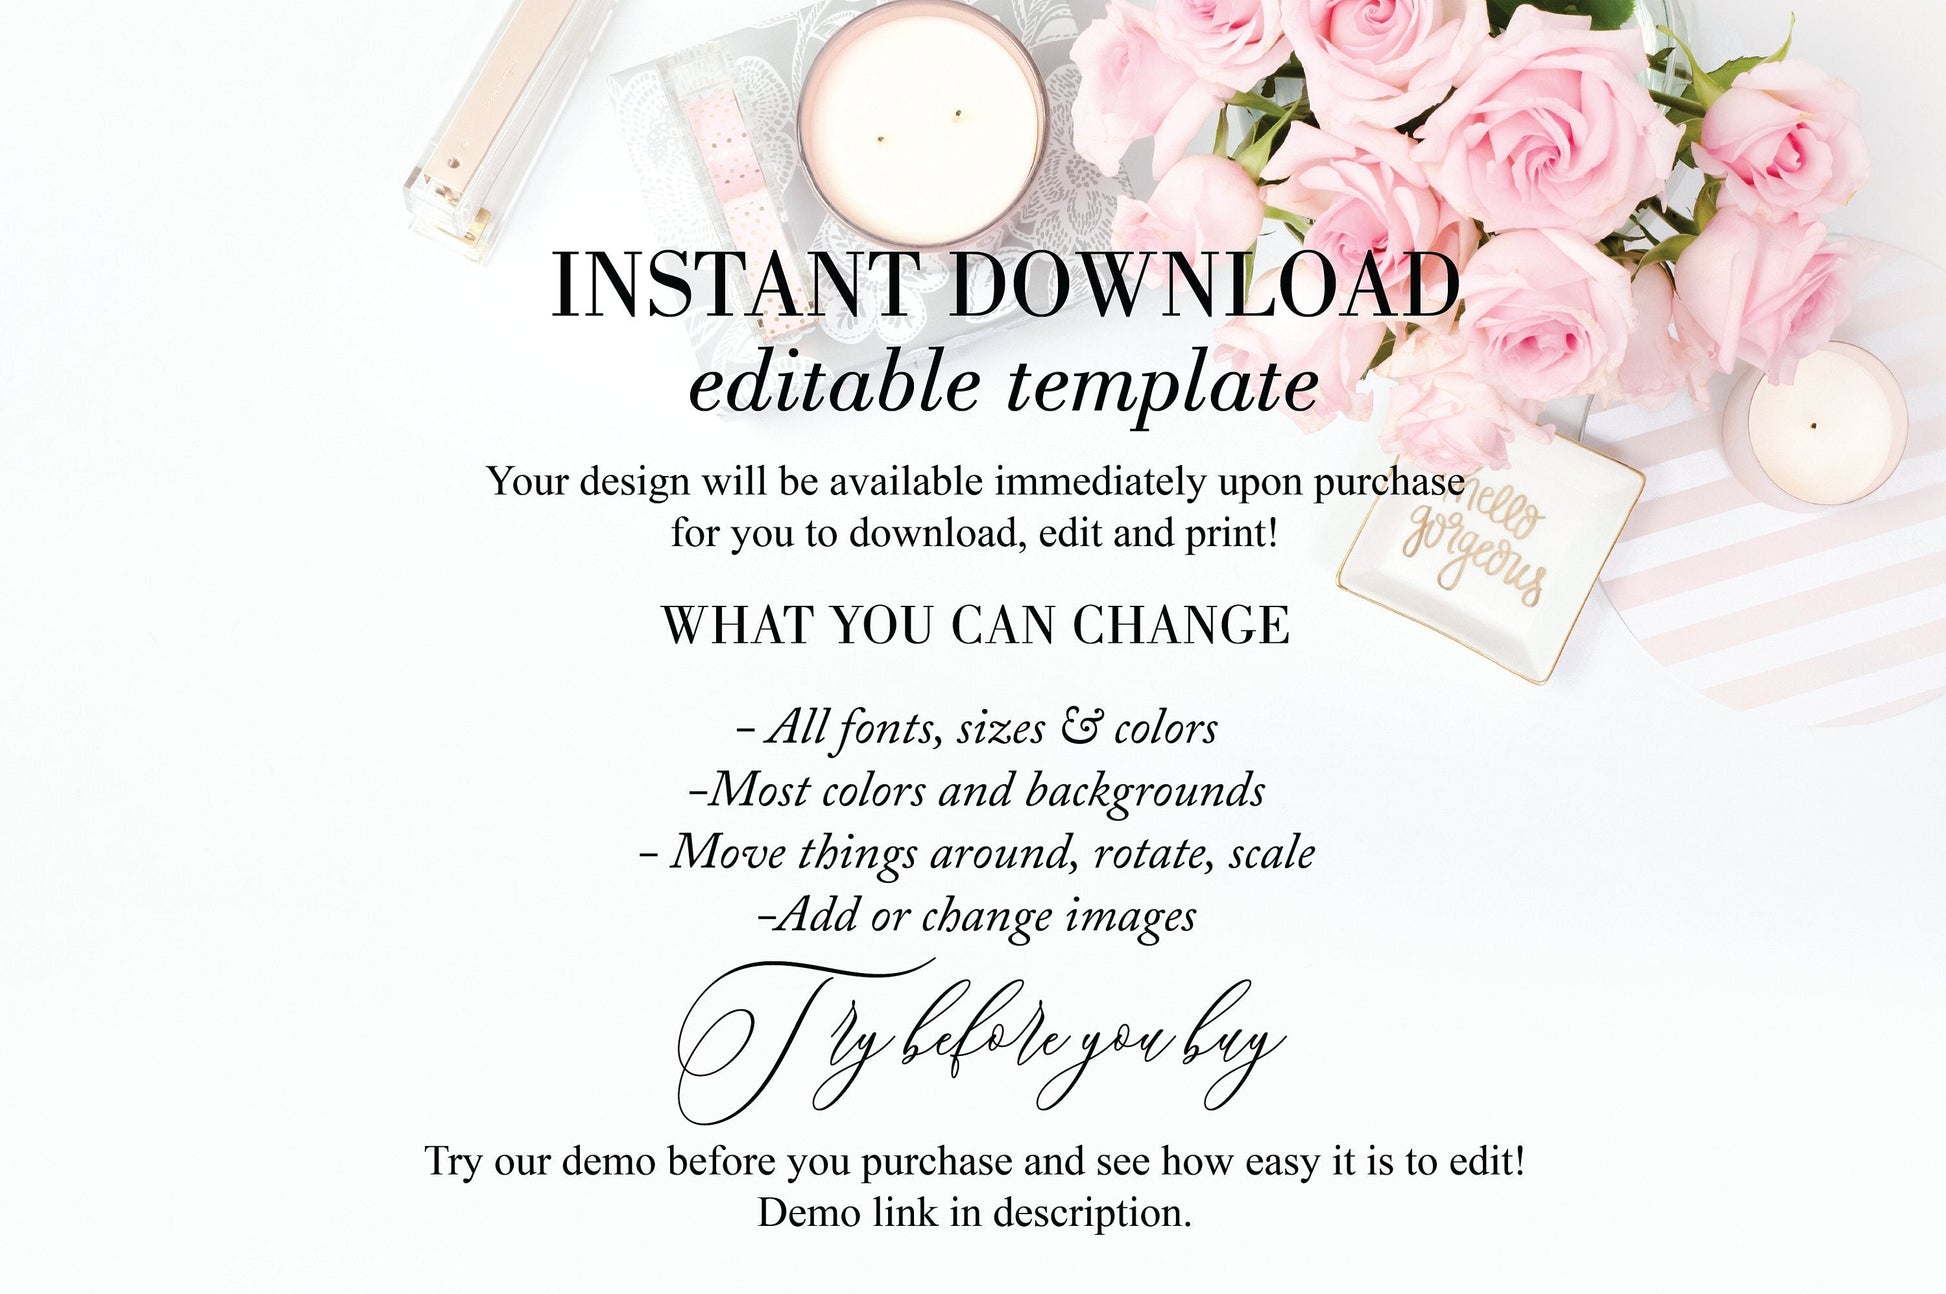 Printable Wedding Itinerary Template Card Timeline Welcome 100% editable Templett Floral Dusty Blue Blush - Rhea MENU|PROGRAMS|TIMELINE SAVVY PAPER CO